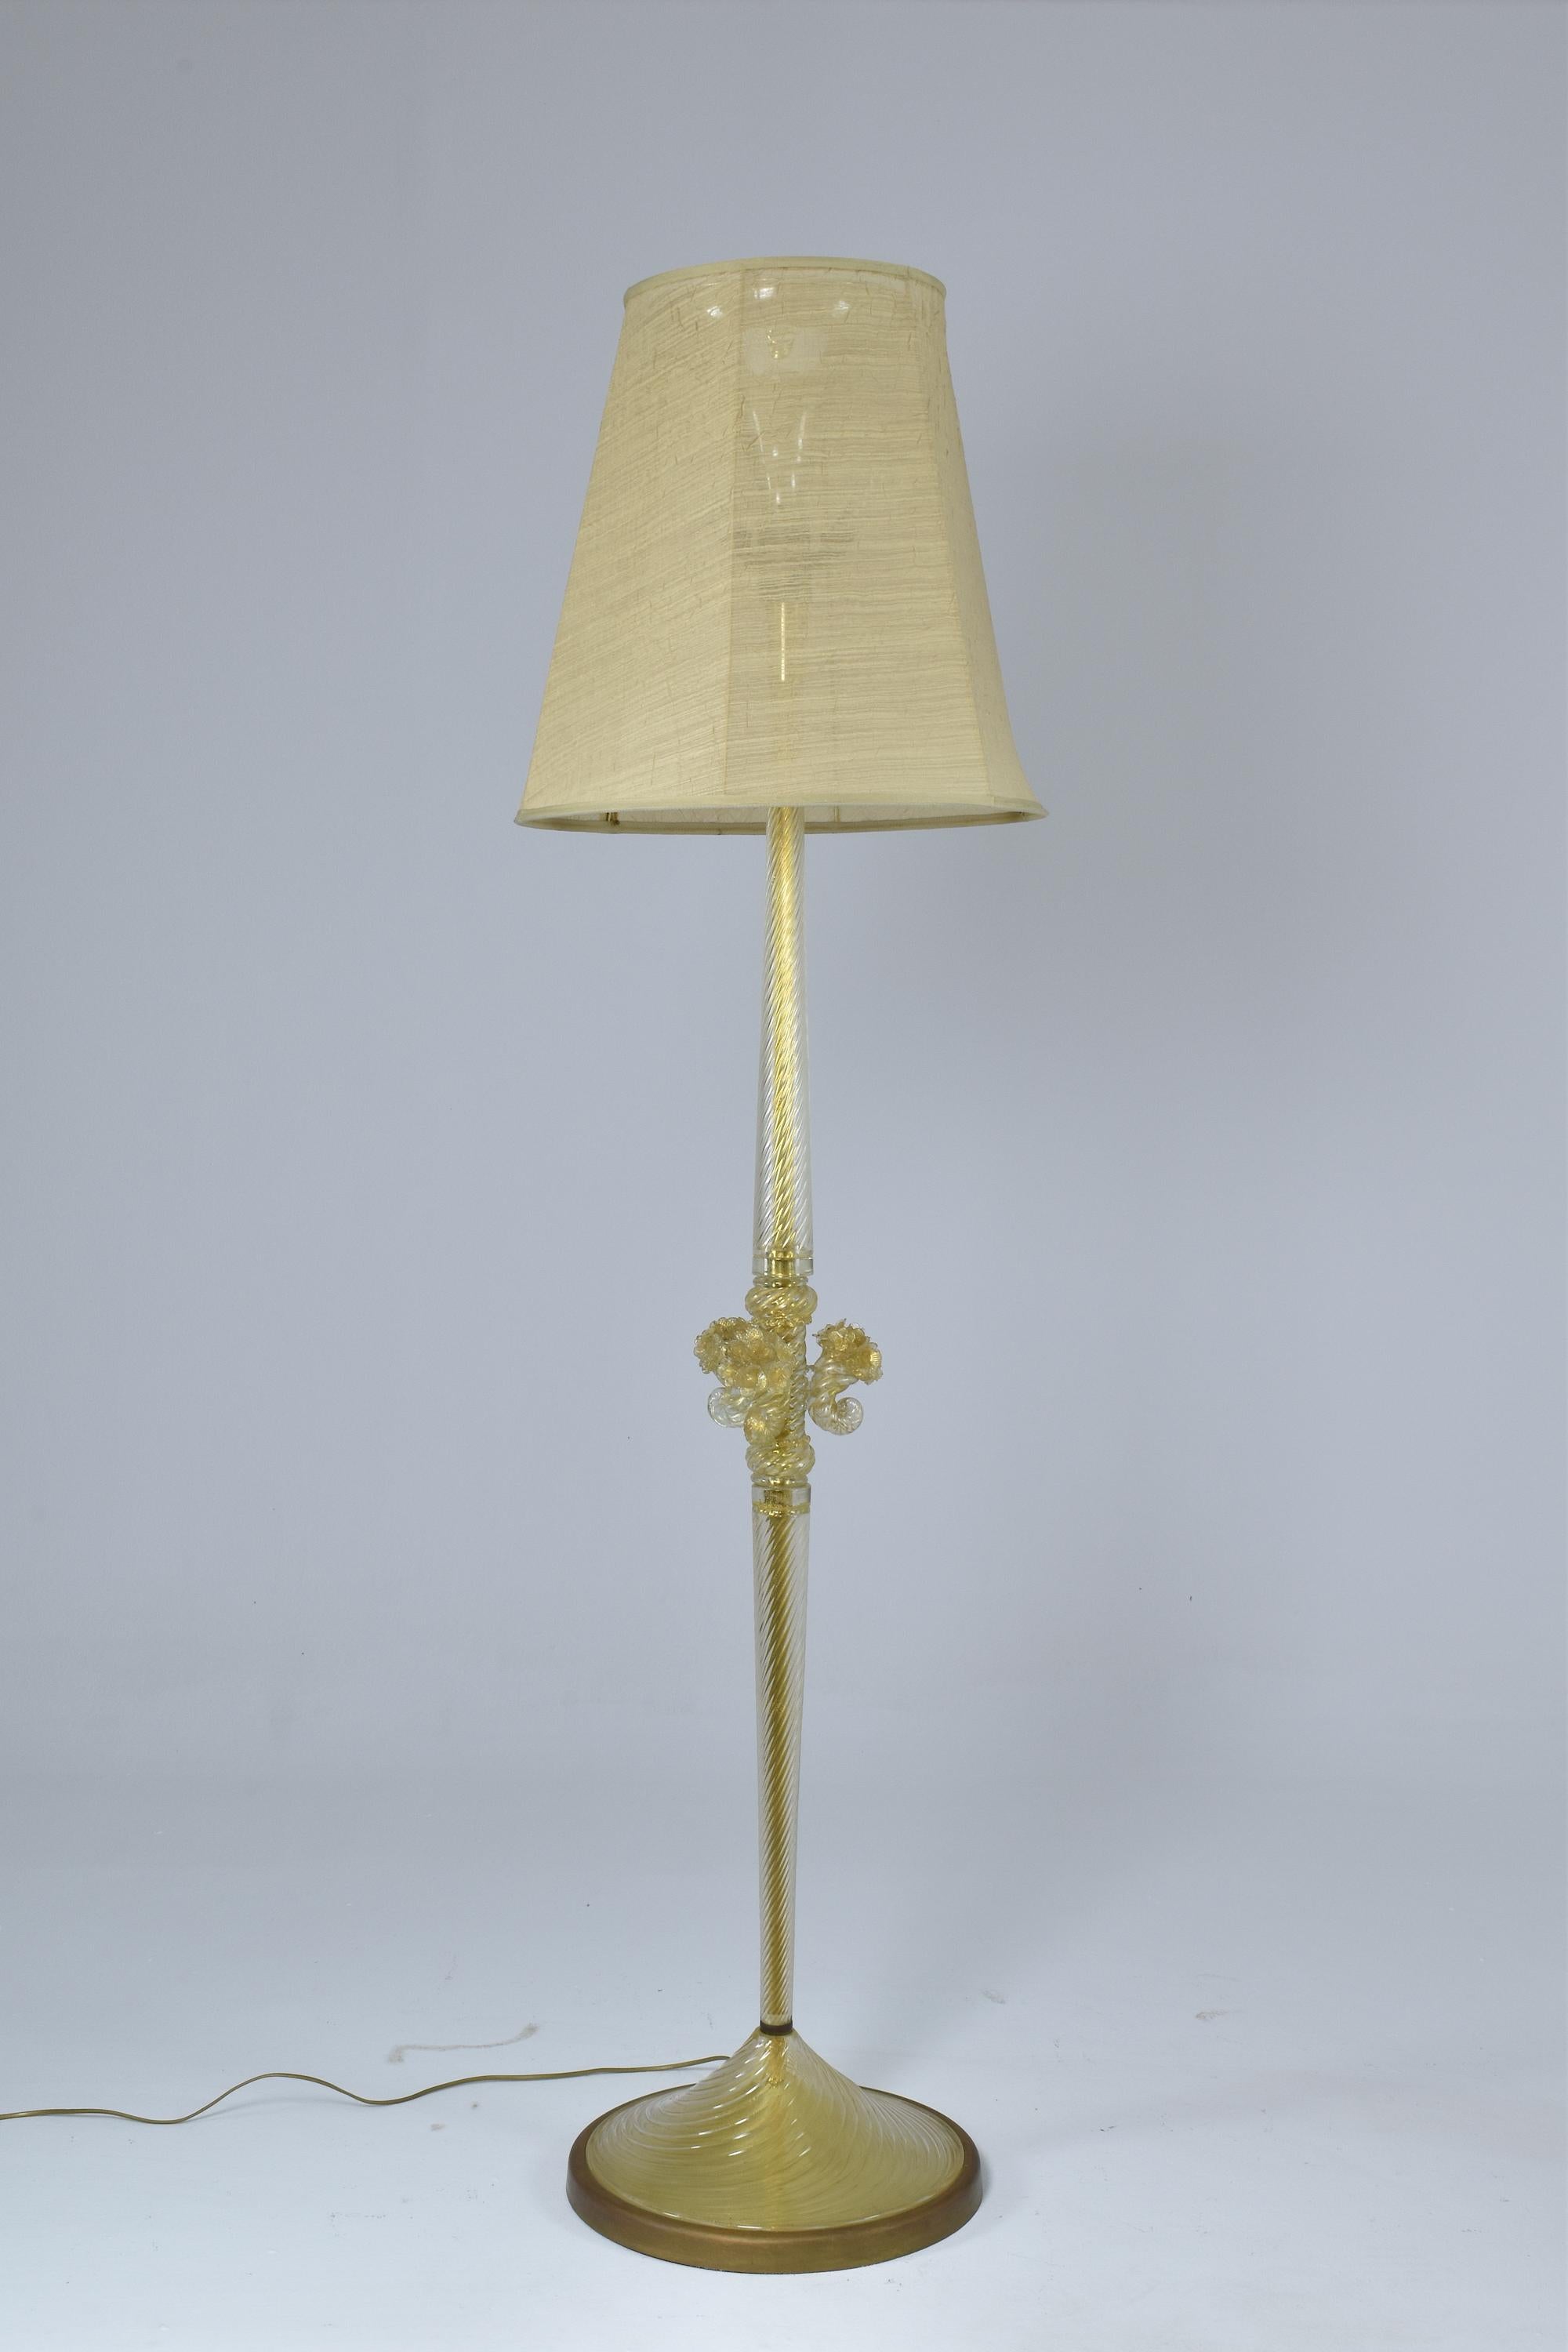 Brass Italian Gold Murano Floor Lamp by Barovier Ercole, 1950s For Sale